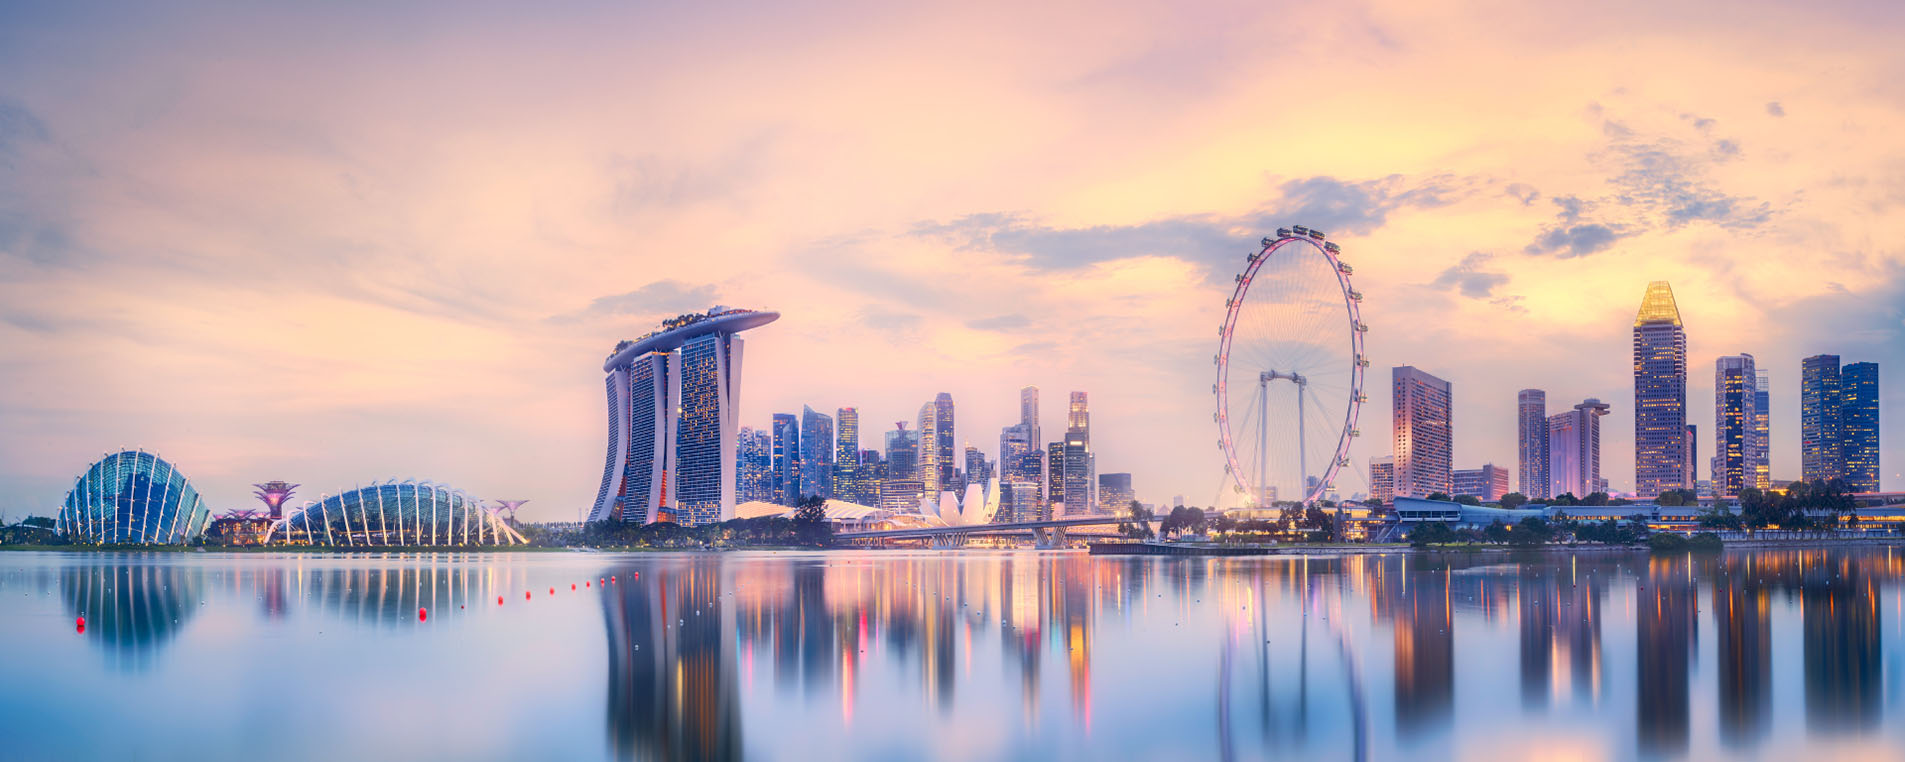 Singapore is harnessing AI to push the country ahead. Photo source: Shutterstock 